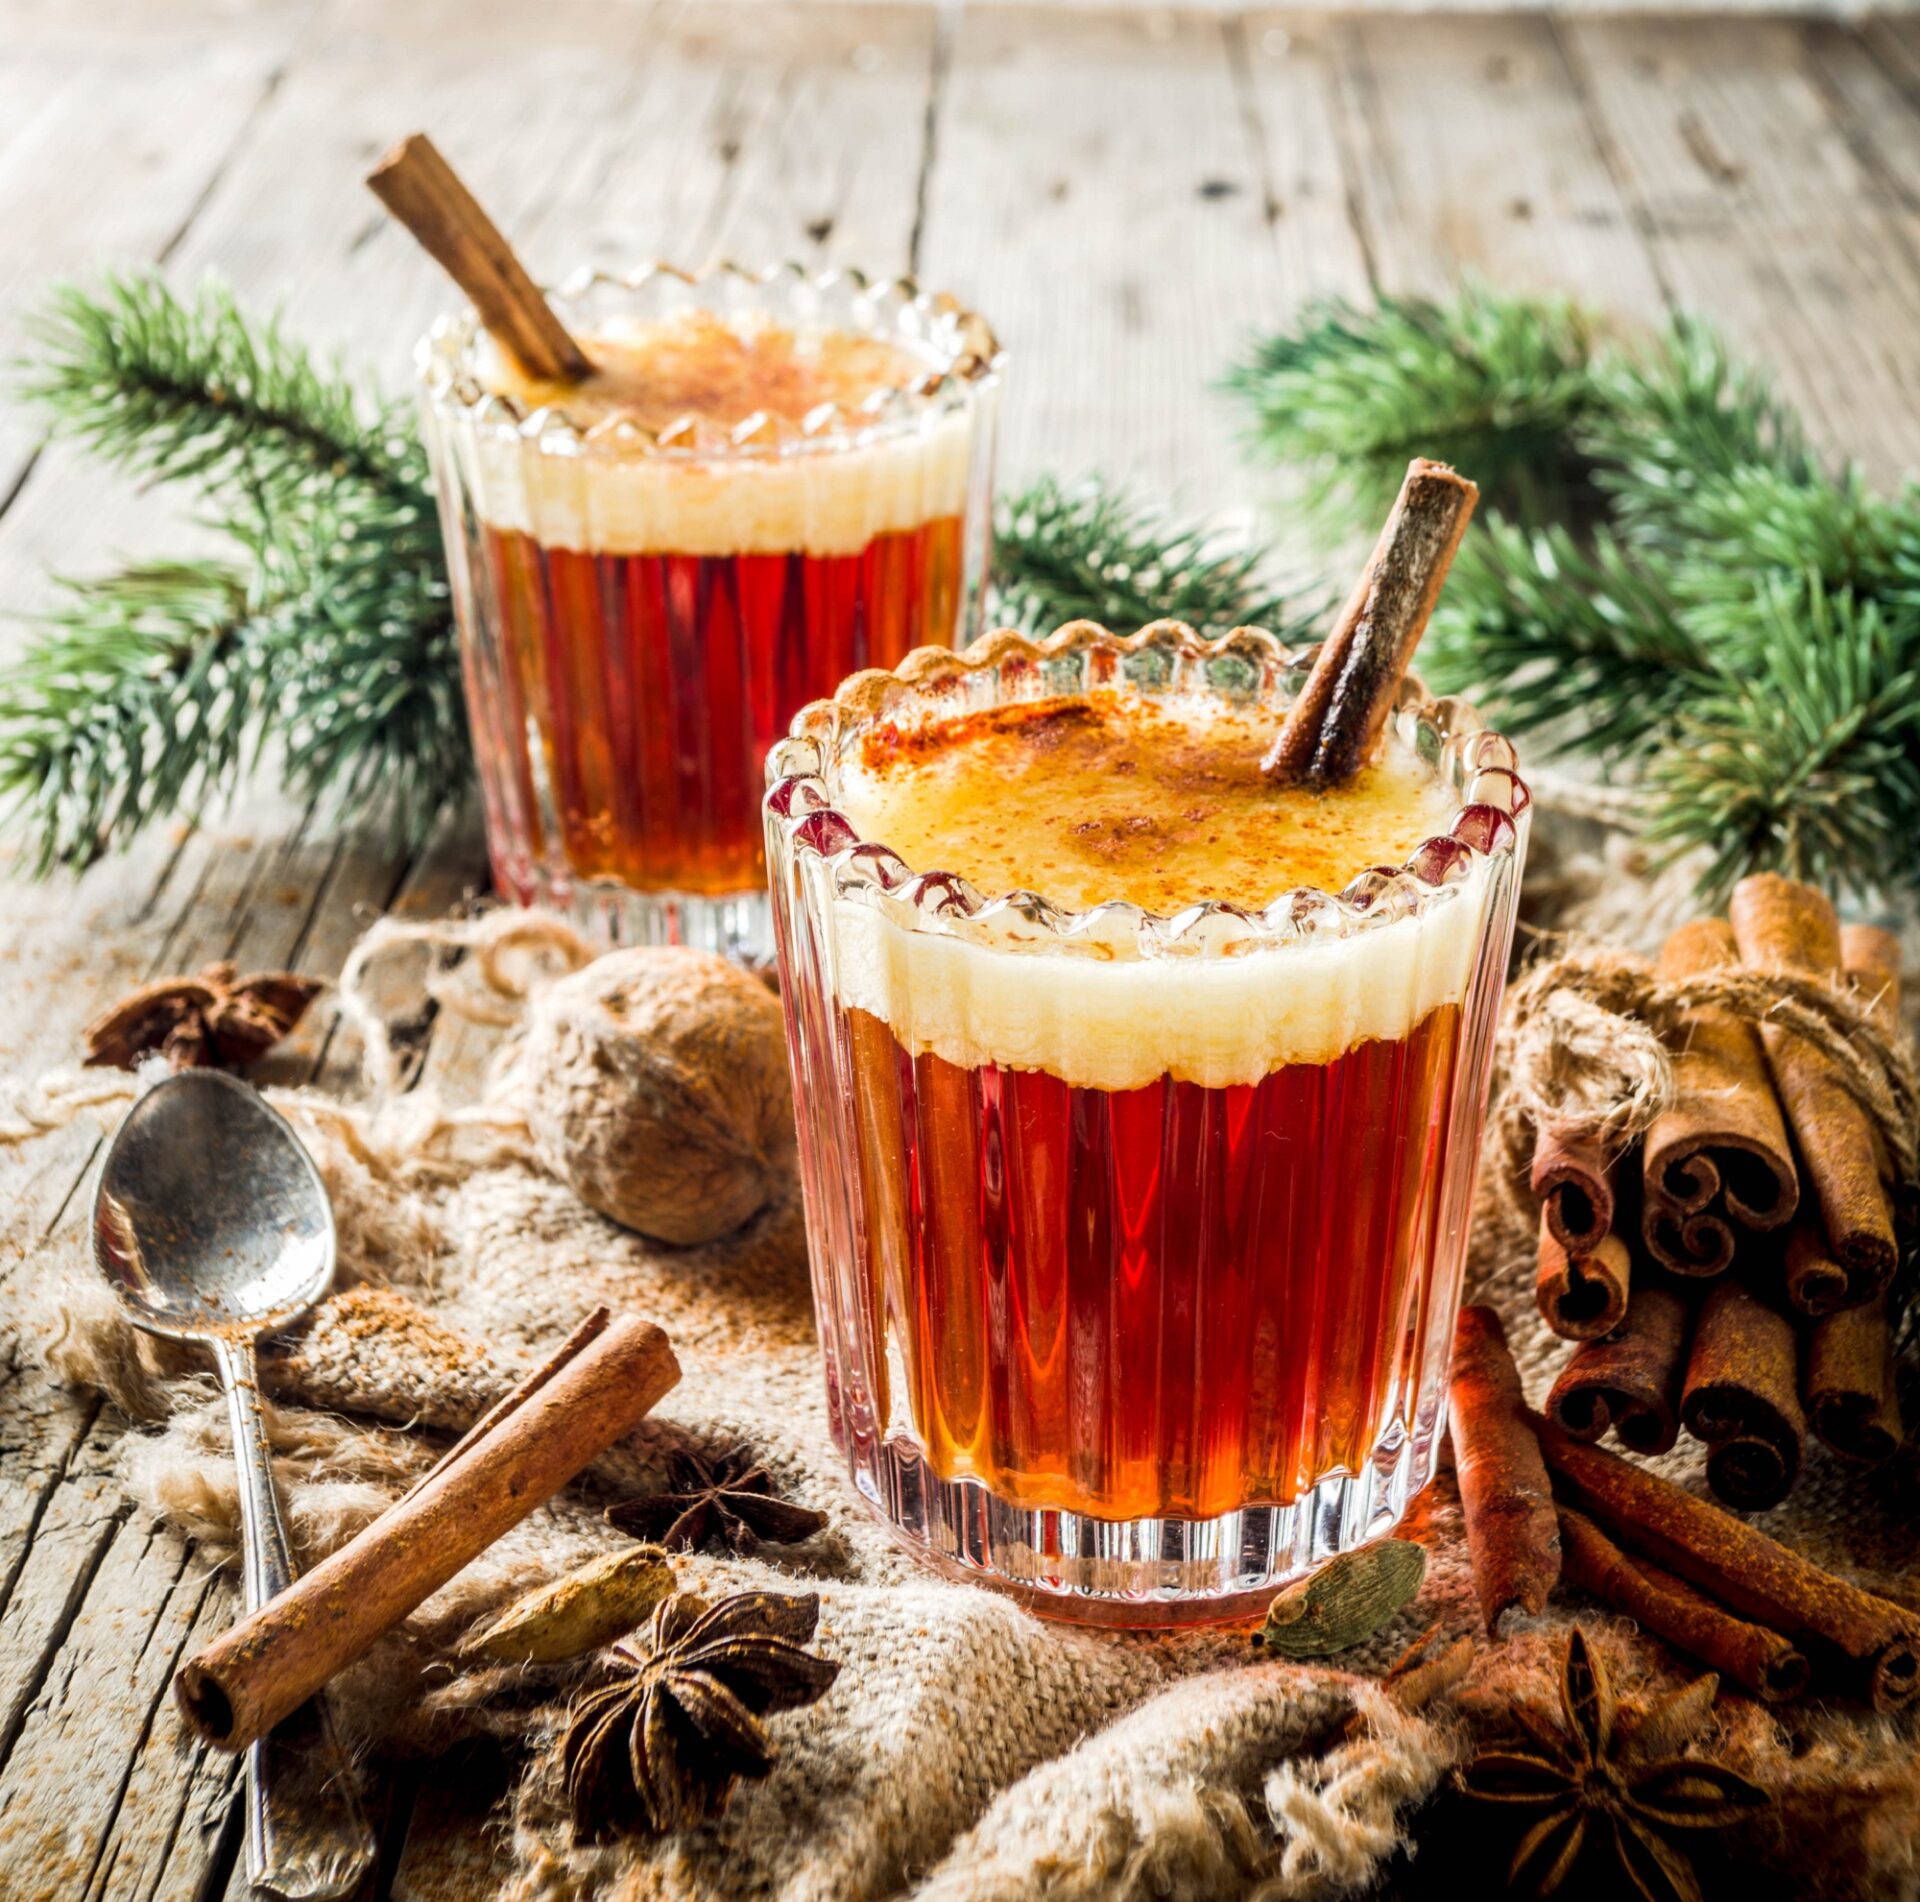 Hot buttered rum on a counter with wintry decor.